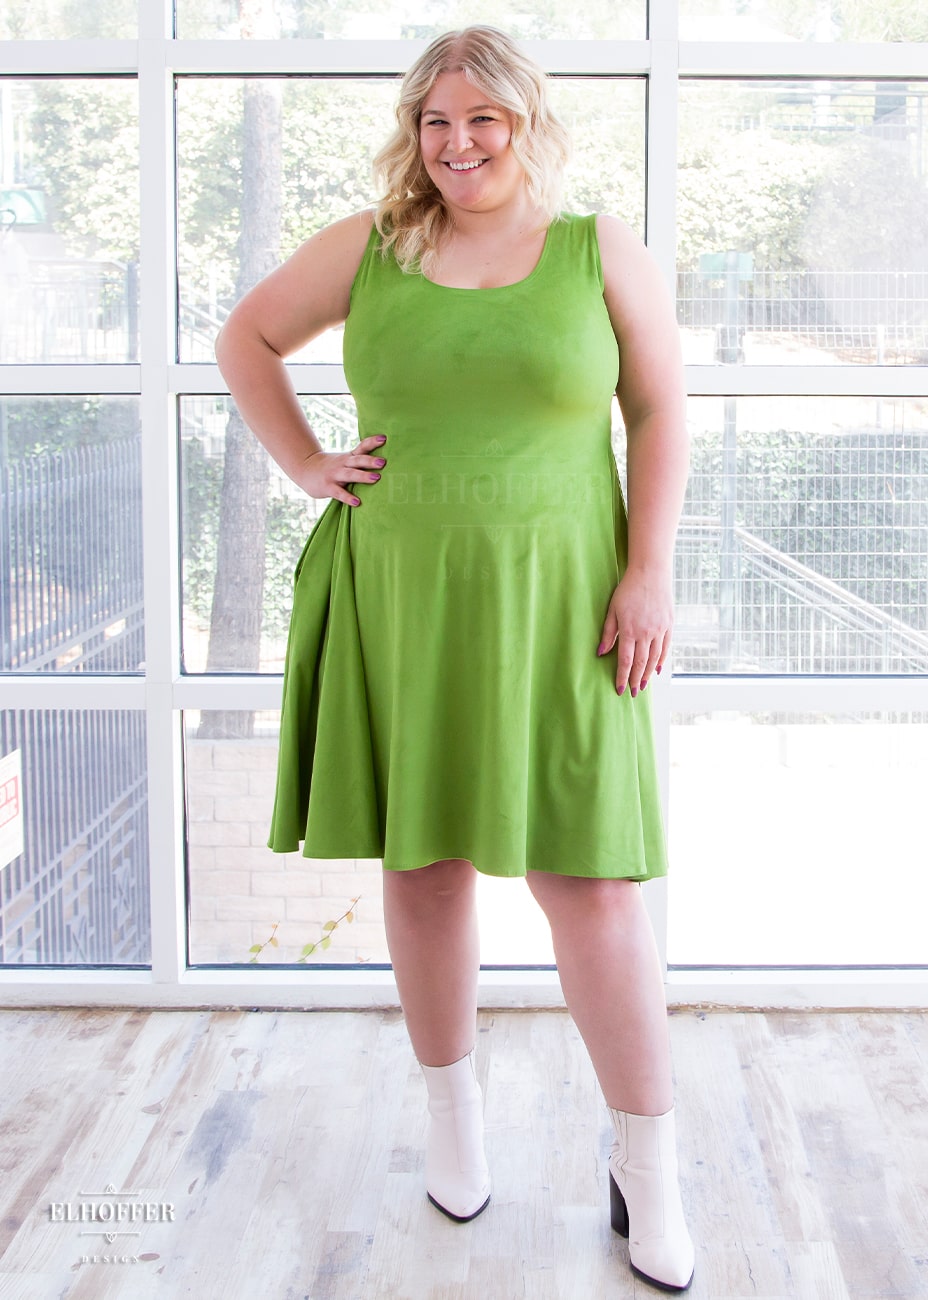 Sarah, a fair skinned size XL model with long blonde hair, wears  a light green suede knee length dress with fitted torso and full skirt. Her hand is on her waist to show off the fitted torso.